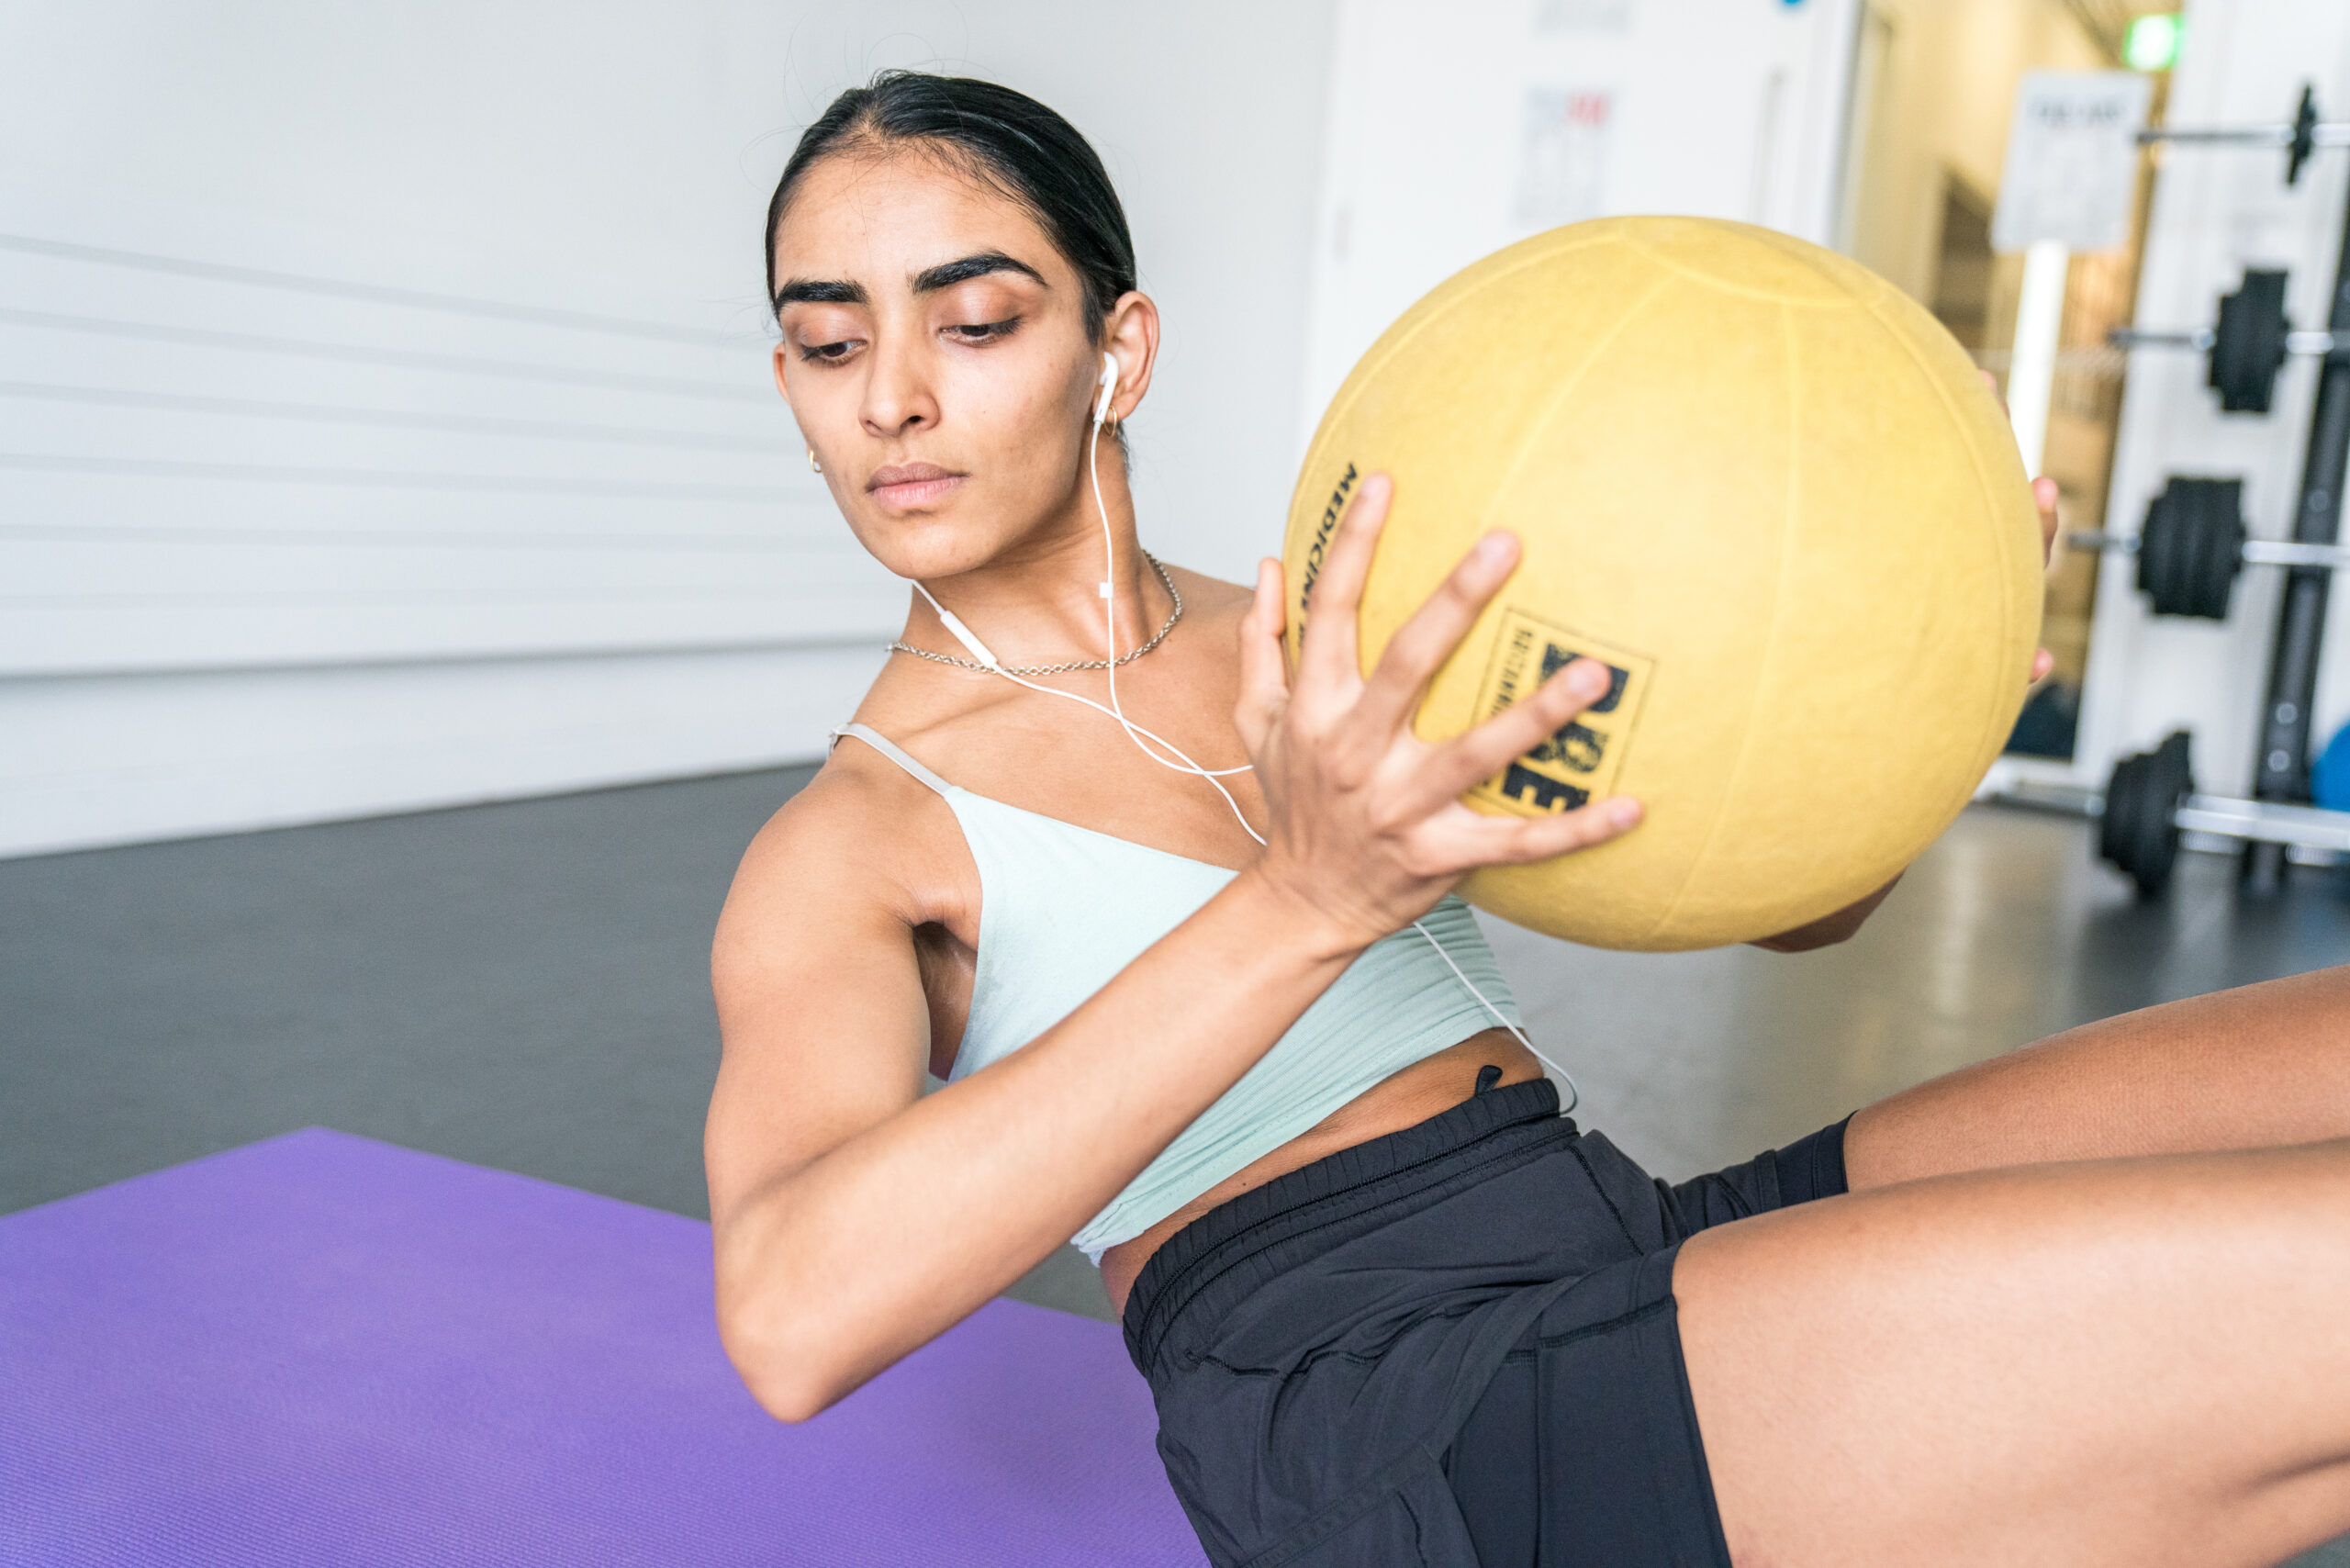 a woman holding a yellow ball in a gym.